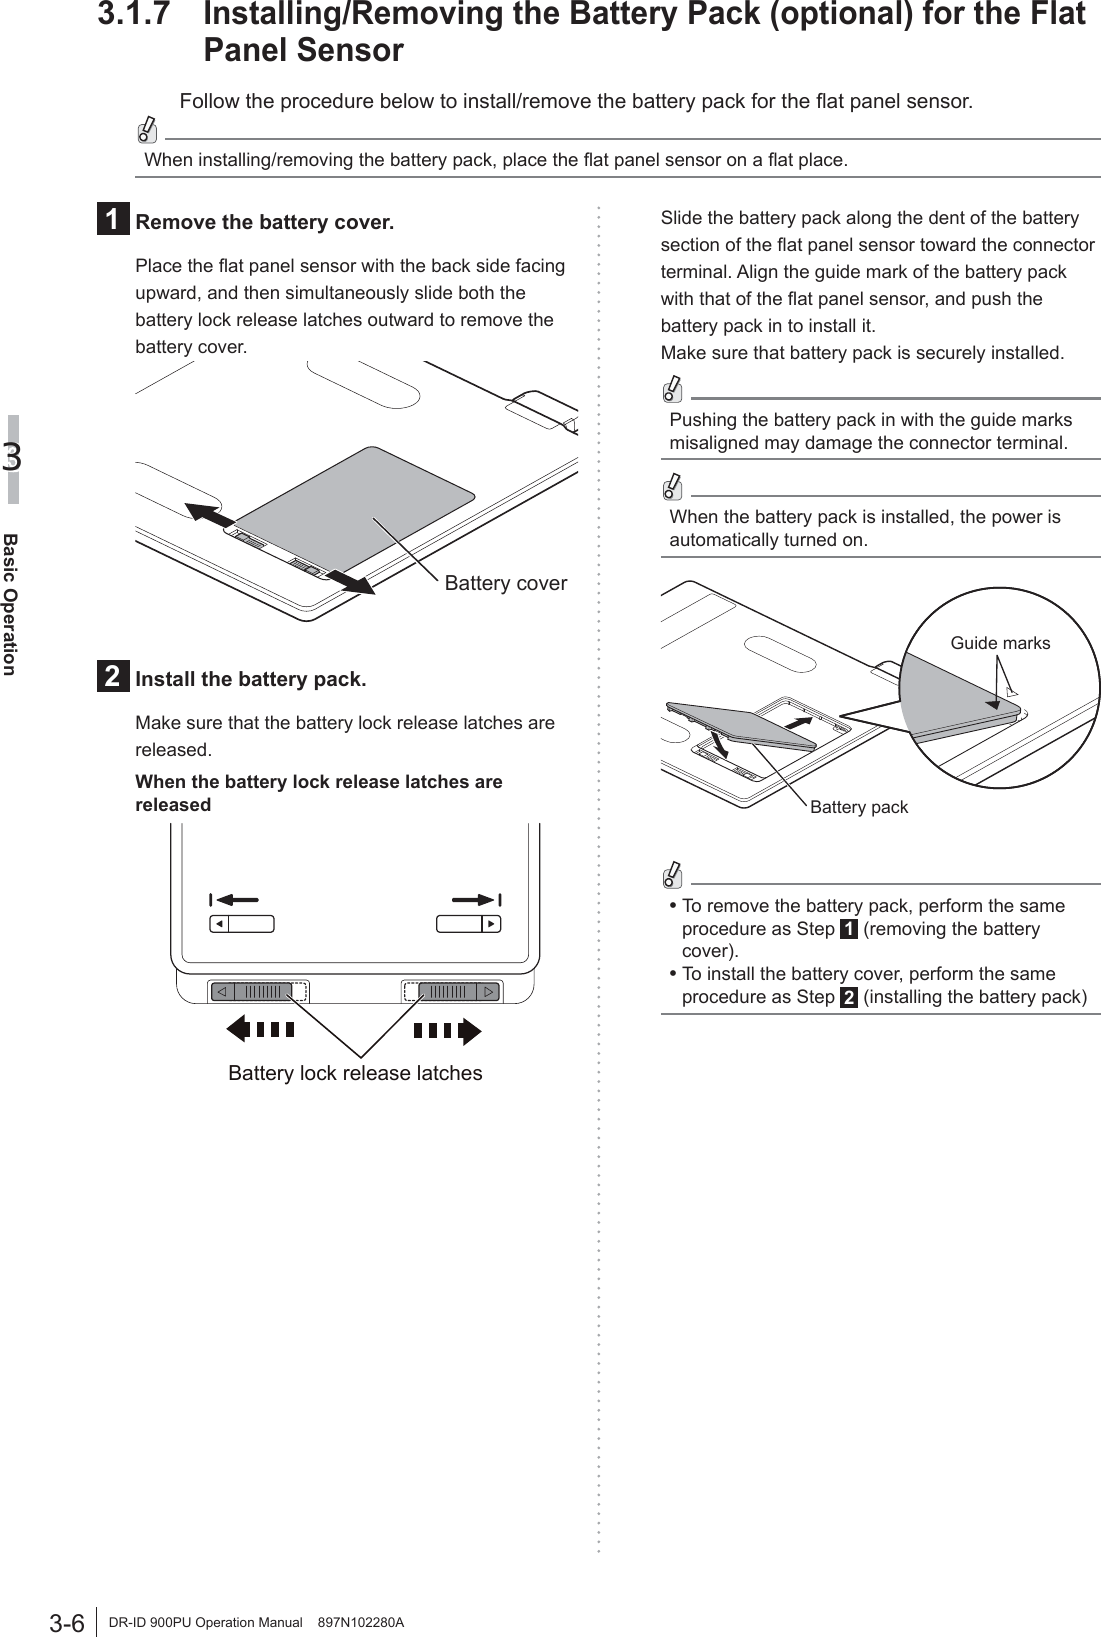 3-6Basic Operation3DR-ID 900PU Operation Manual    897N102280A3.1.7 Installing/Removing the Battery Pack (optional) for the Flat Panel SensorFollow the procedure below to install/remove the battery pack for the ﬂat panel sensor.When installing/removing the battery pack, place the ﬂat panel sensor on a ﬂat place.1  Remove the battery cover.Place the ﬂat panel sensor with the back side facing upward, and then simultaneously slide both the battery lock release latches outward to remove the battery cover.Battery cover2  Install the battery pack.Make sure that the battery lock release latches are released.When the battery lock release latches are releasedBattery lock release latchesSlide the battery pack along the dent of the battery section of the ﬂat panel sensor toward the connector terminal. Align the guide mark of the battery pack with that of the ﬂat panel sensor, and push the battery pack in to install it.Make sure that battery pack is securely installed.Pushing the battery pack in with the guide marks misaligned may damage the connector terminal. When the battery pack is installed, the power is automatically turned on.Battery packGuide marks•  To remove the battery pack, perform the same procedure as Step 1 (removing the battery cover).•  To install the battery cover, perform the same procedure as Step 2 (installing the battery pack)